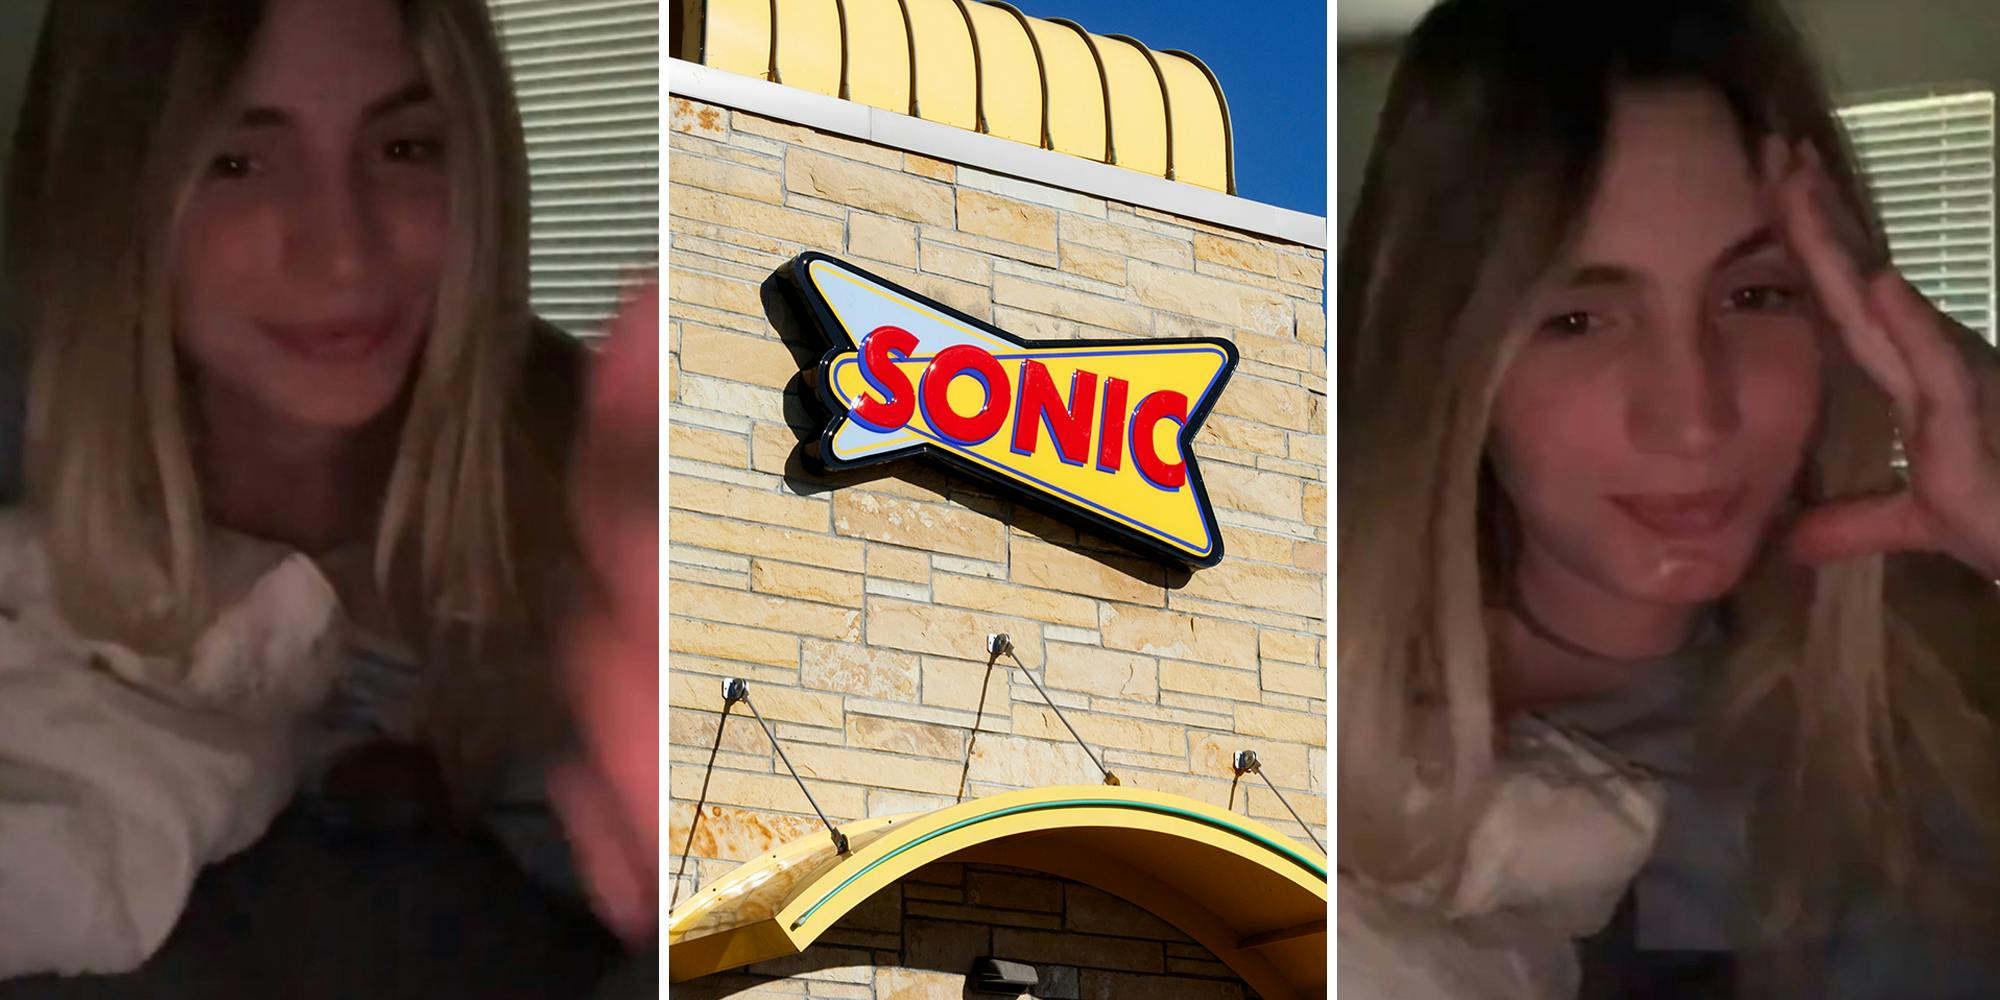 Woman says Sonic never fulfills sauce order on the app